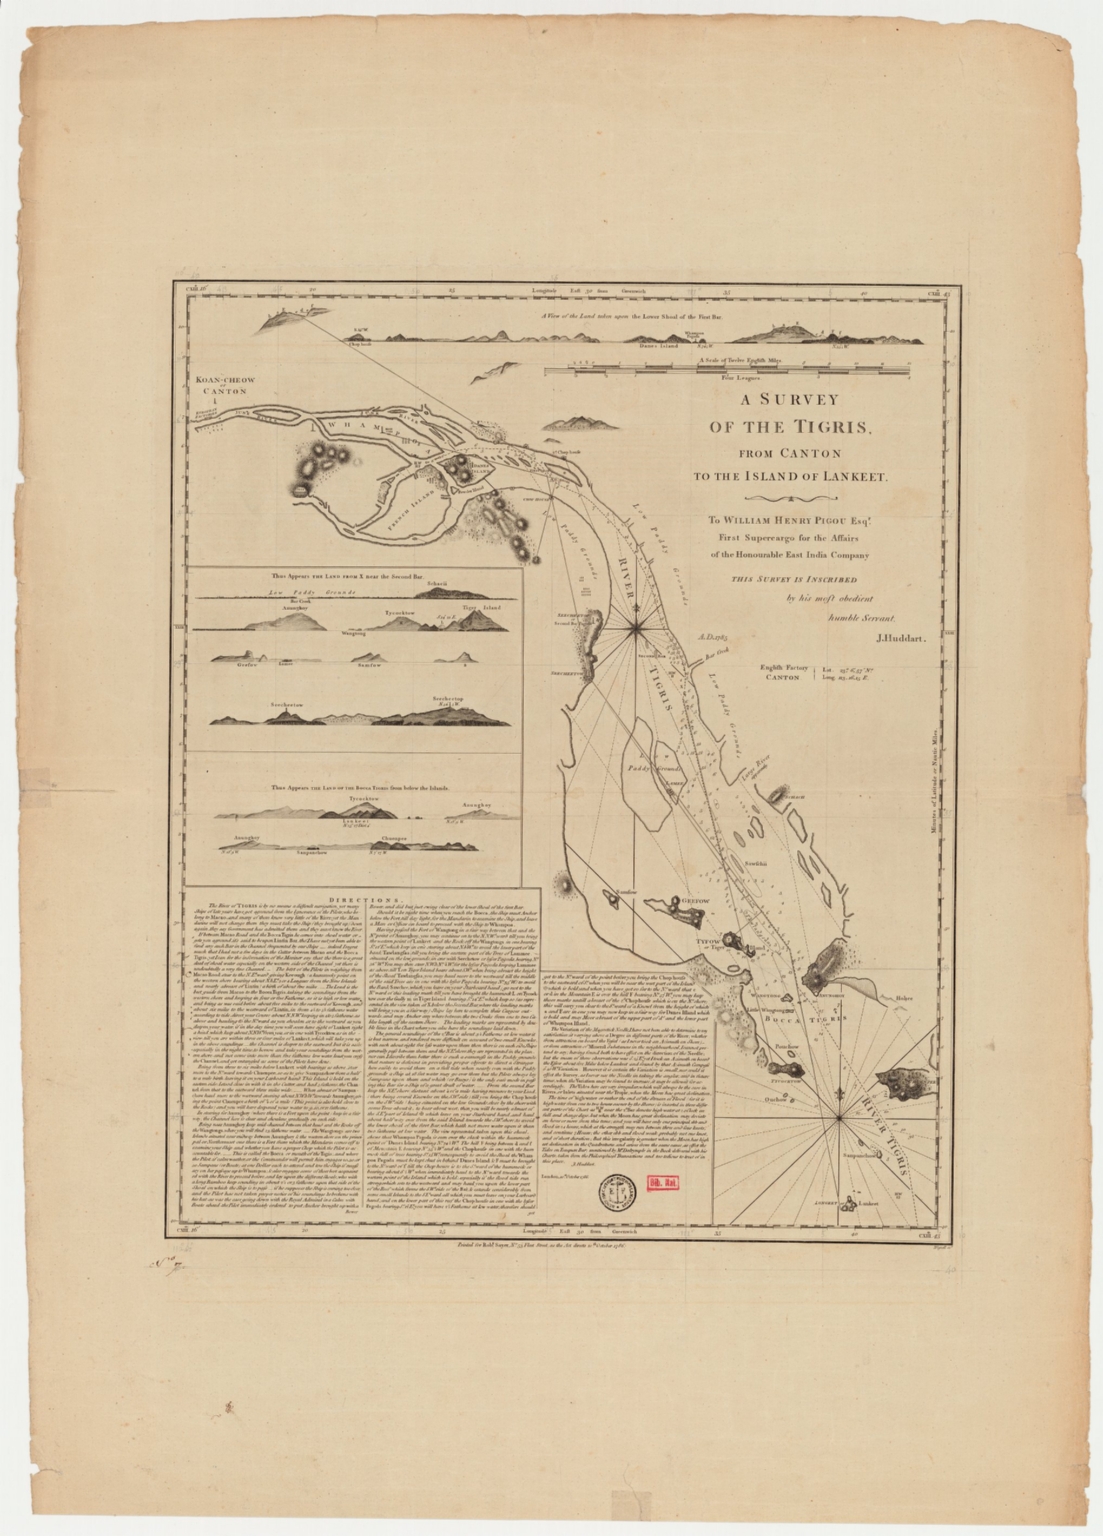 A survey of the Tigris from Canton to the island of Lankeet